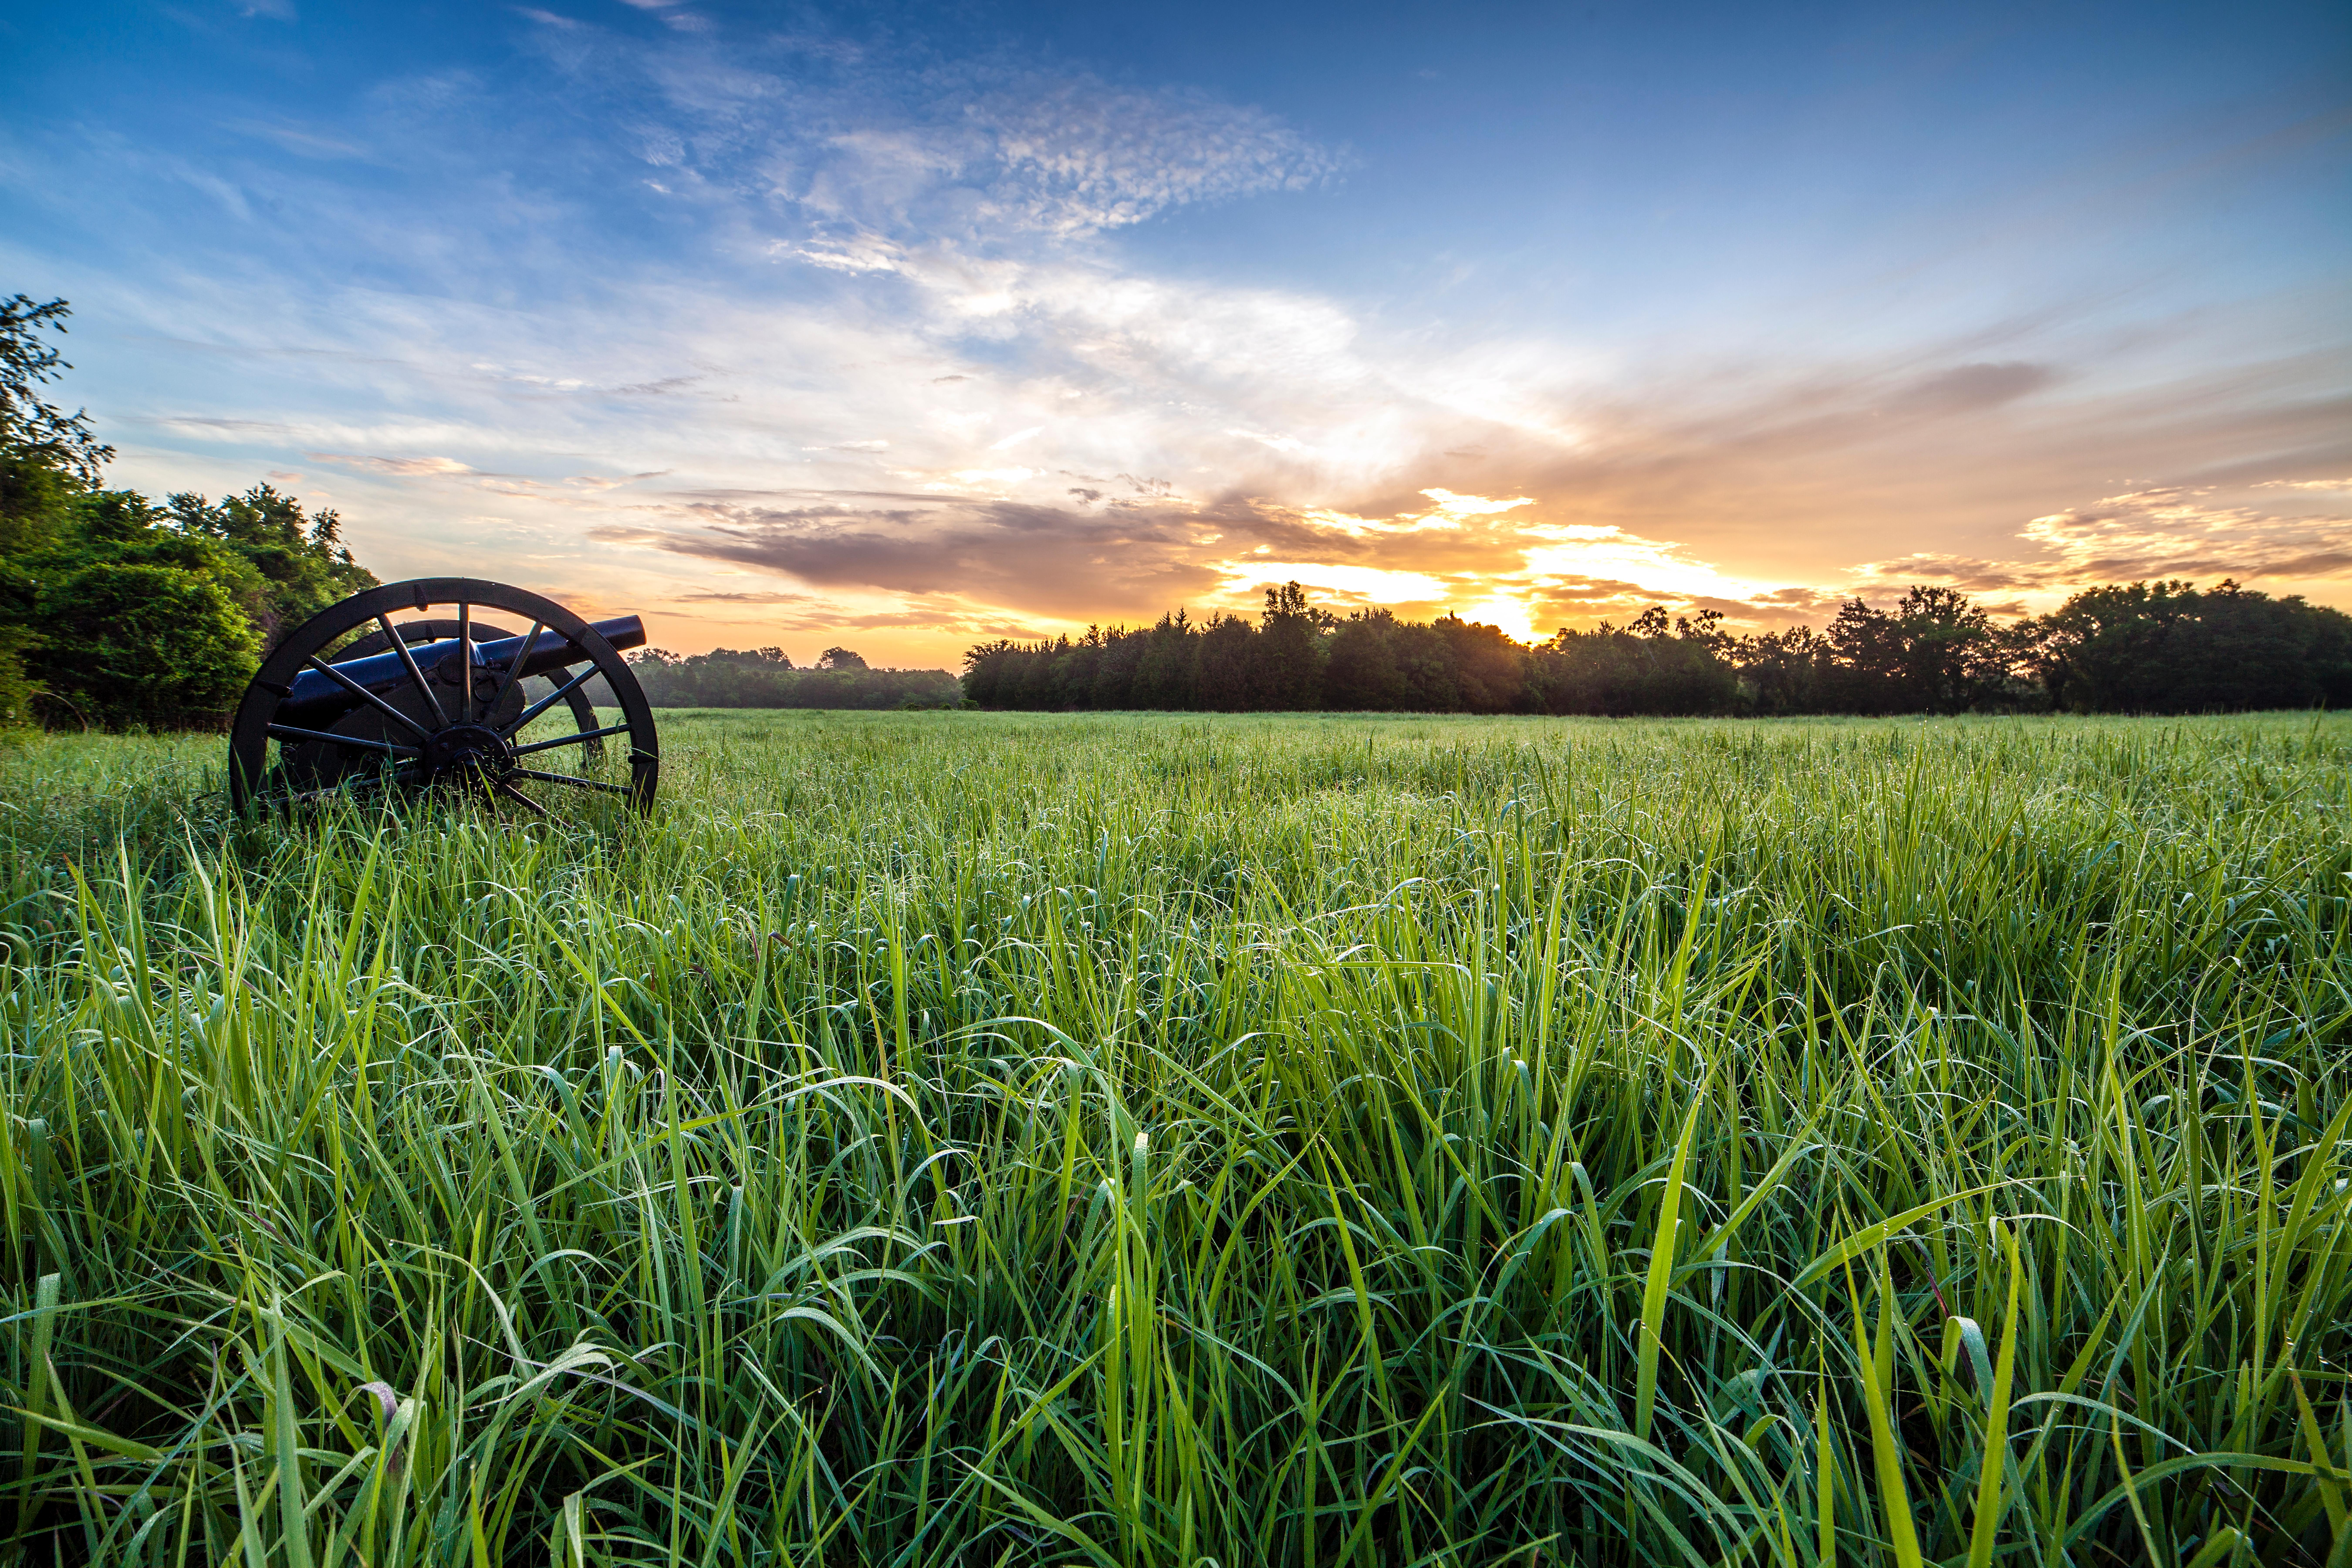 The sun rises behind a green field with a cannon in the foreground.